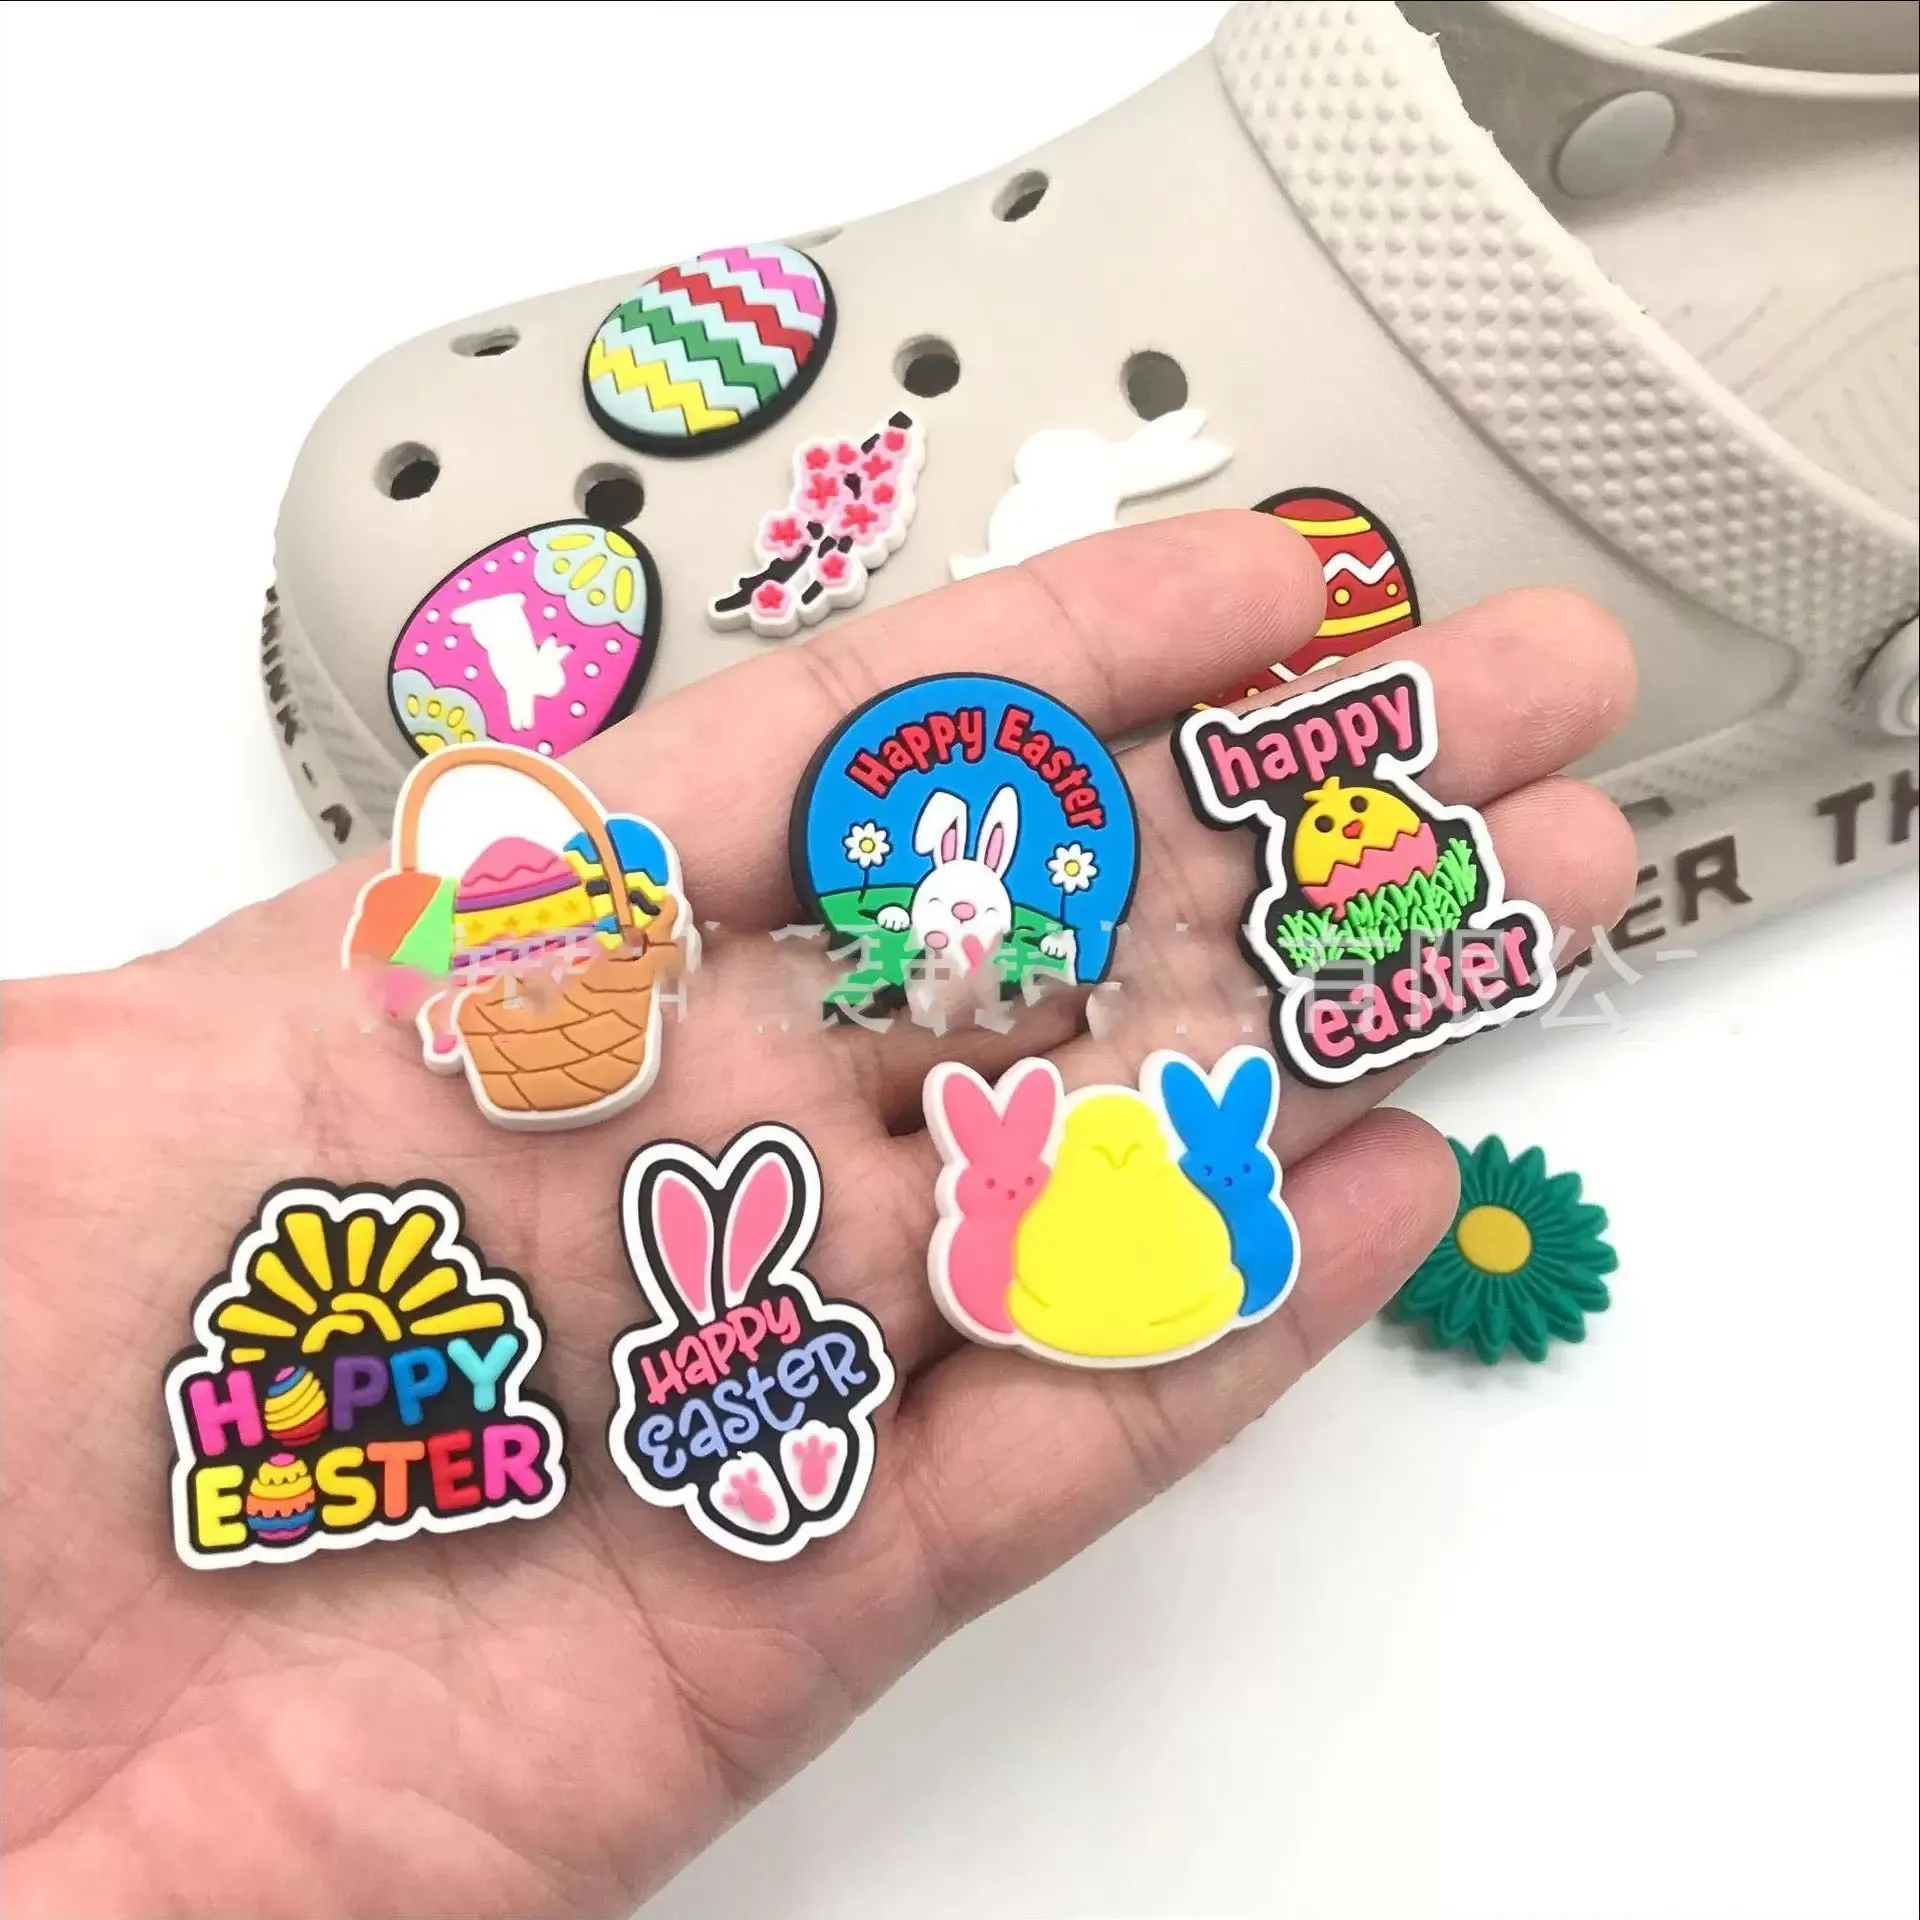 Easter Bunny Charms Cute PVC Cartoon Croc Accessories For Parties And  Wholesale Fast DHL Shipping In Stock From Smyy7, $0.31